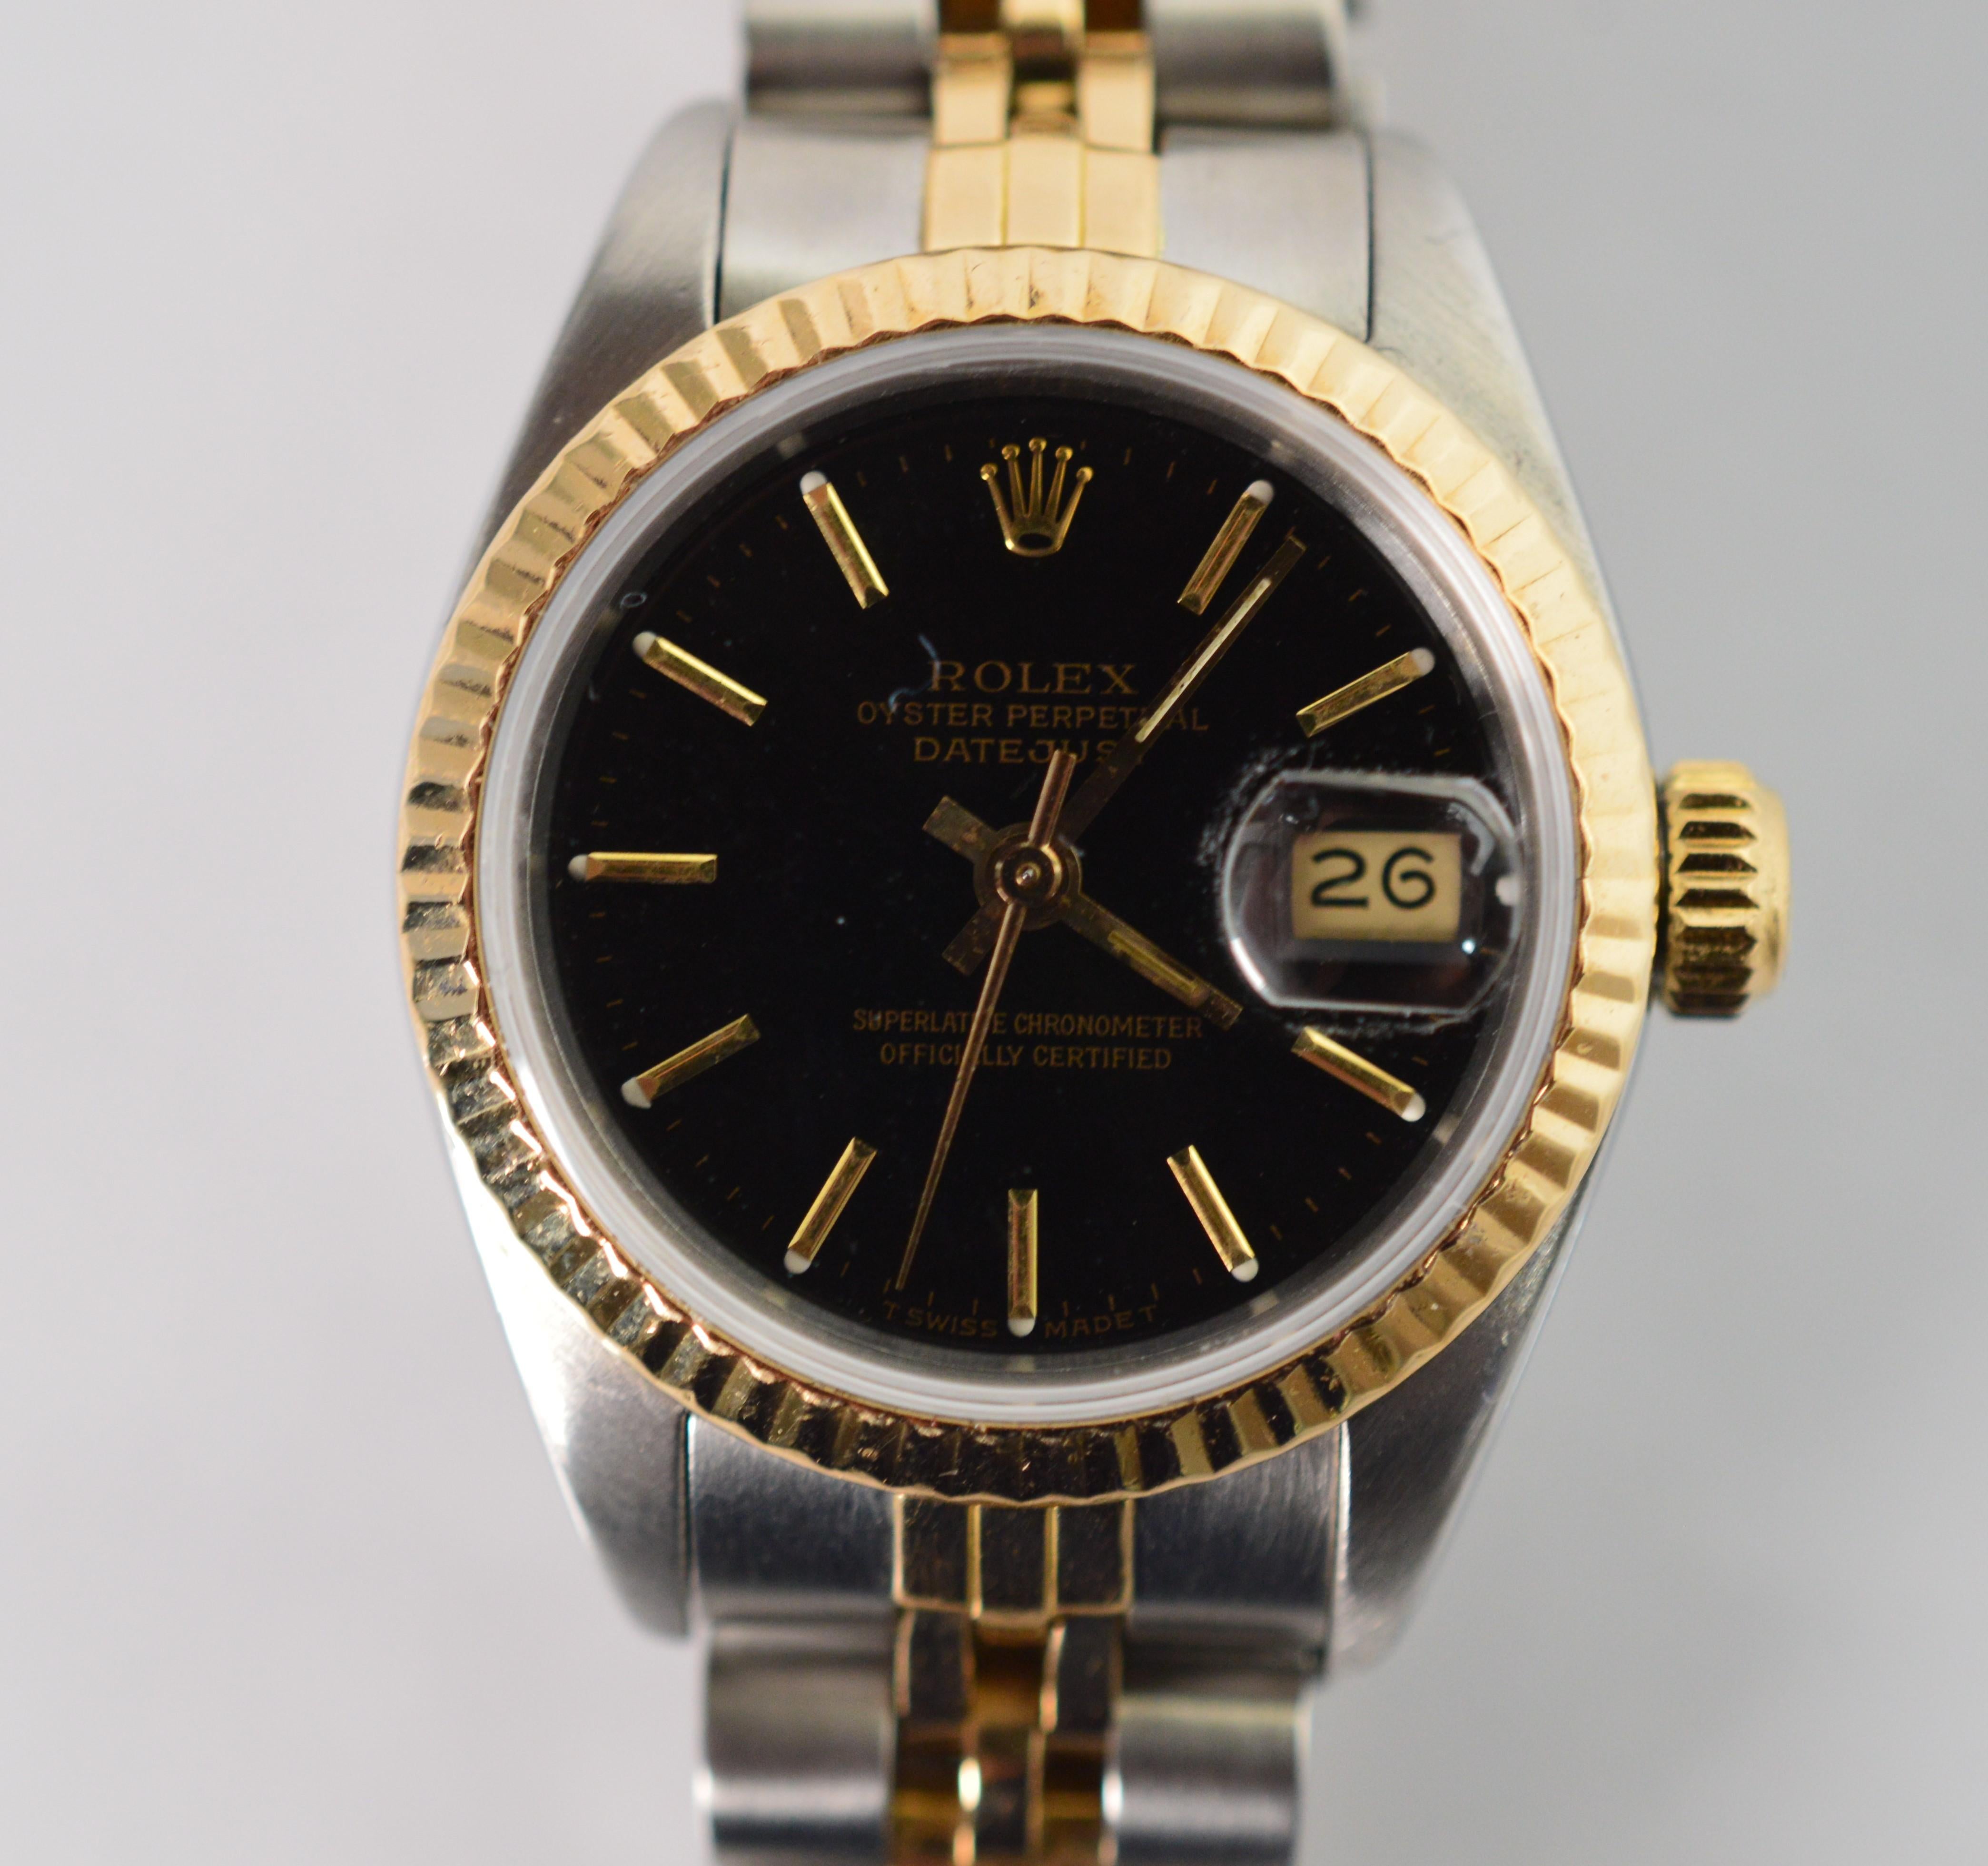 The Rolex Datejust watch model 69173 has a sophisticated look with two tone styling pairing stainless steel with eighteen karat yellow gold creating a a lustrous finish both affordable and appropriate for everyday as a luxury wrist watch that can